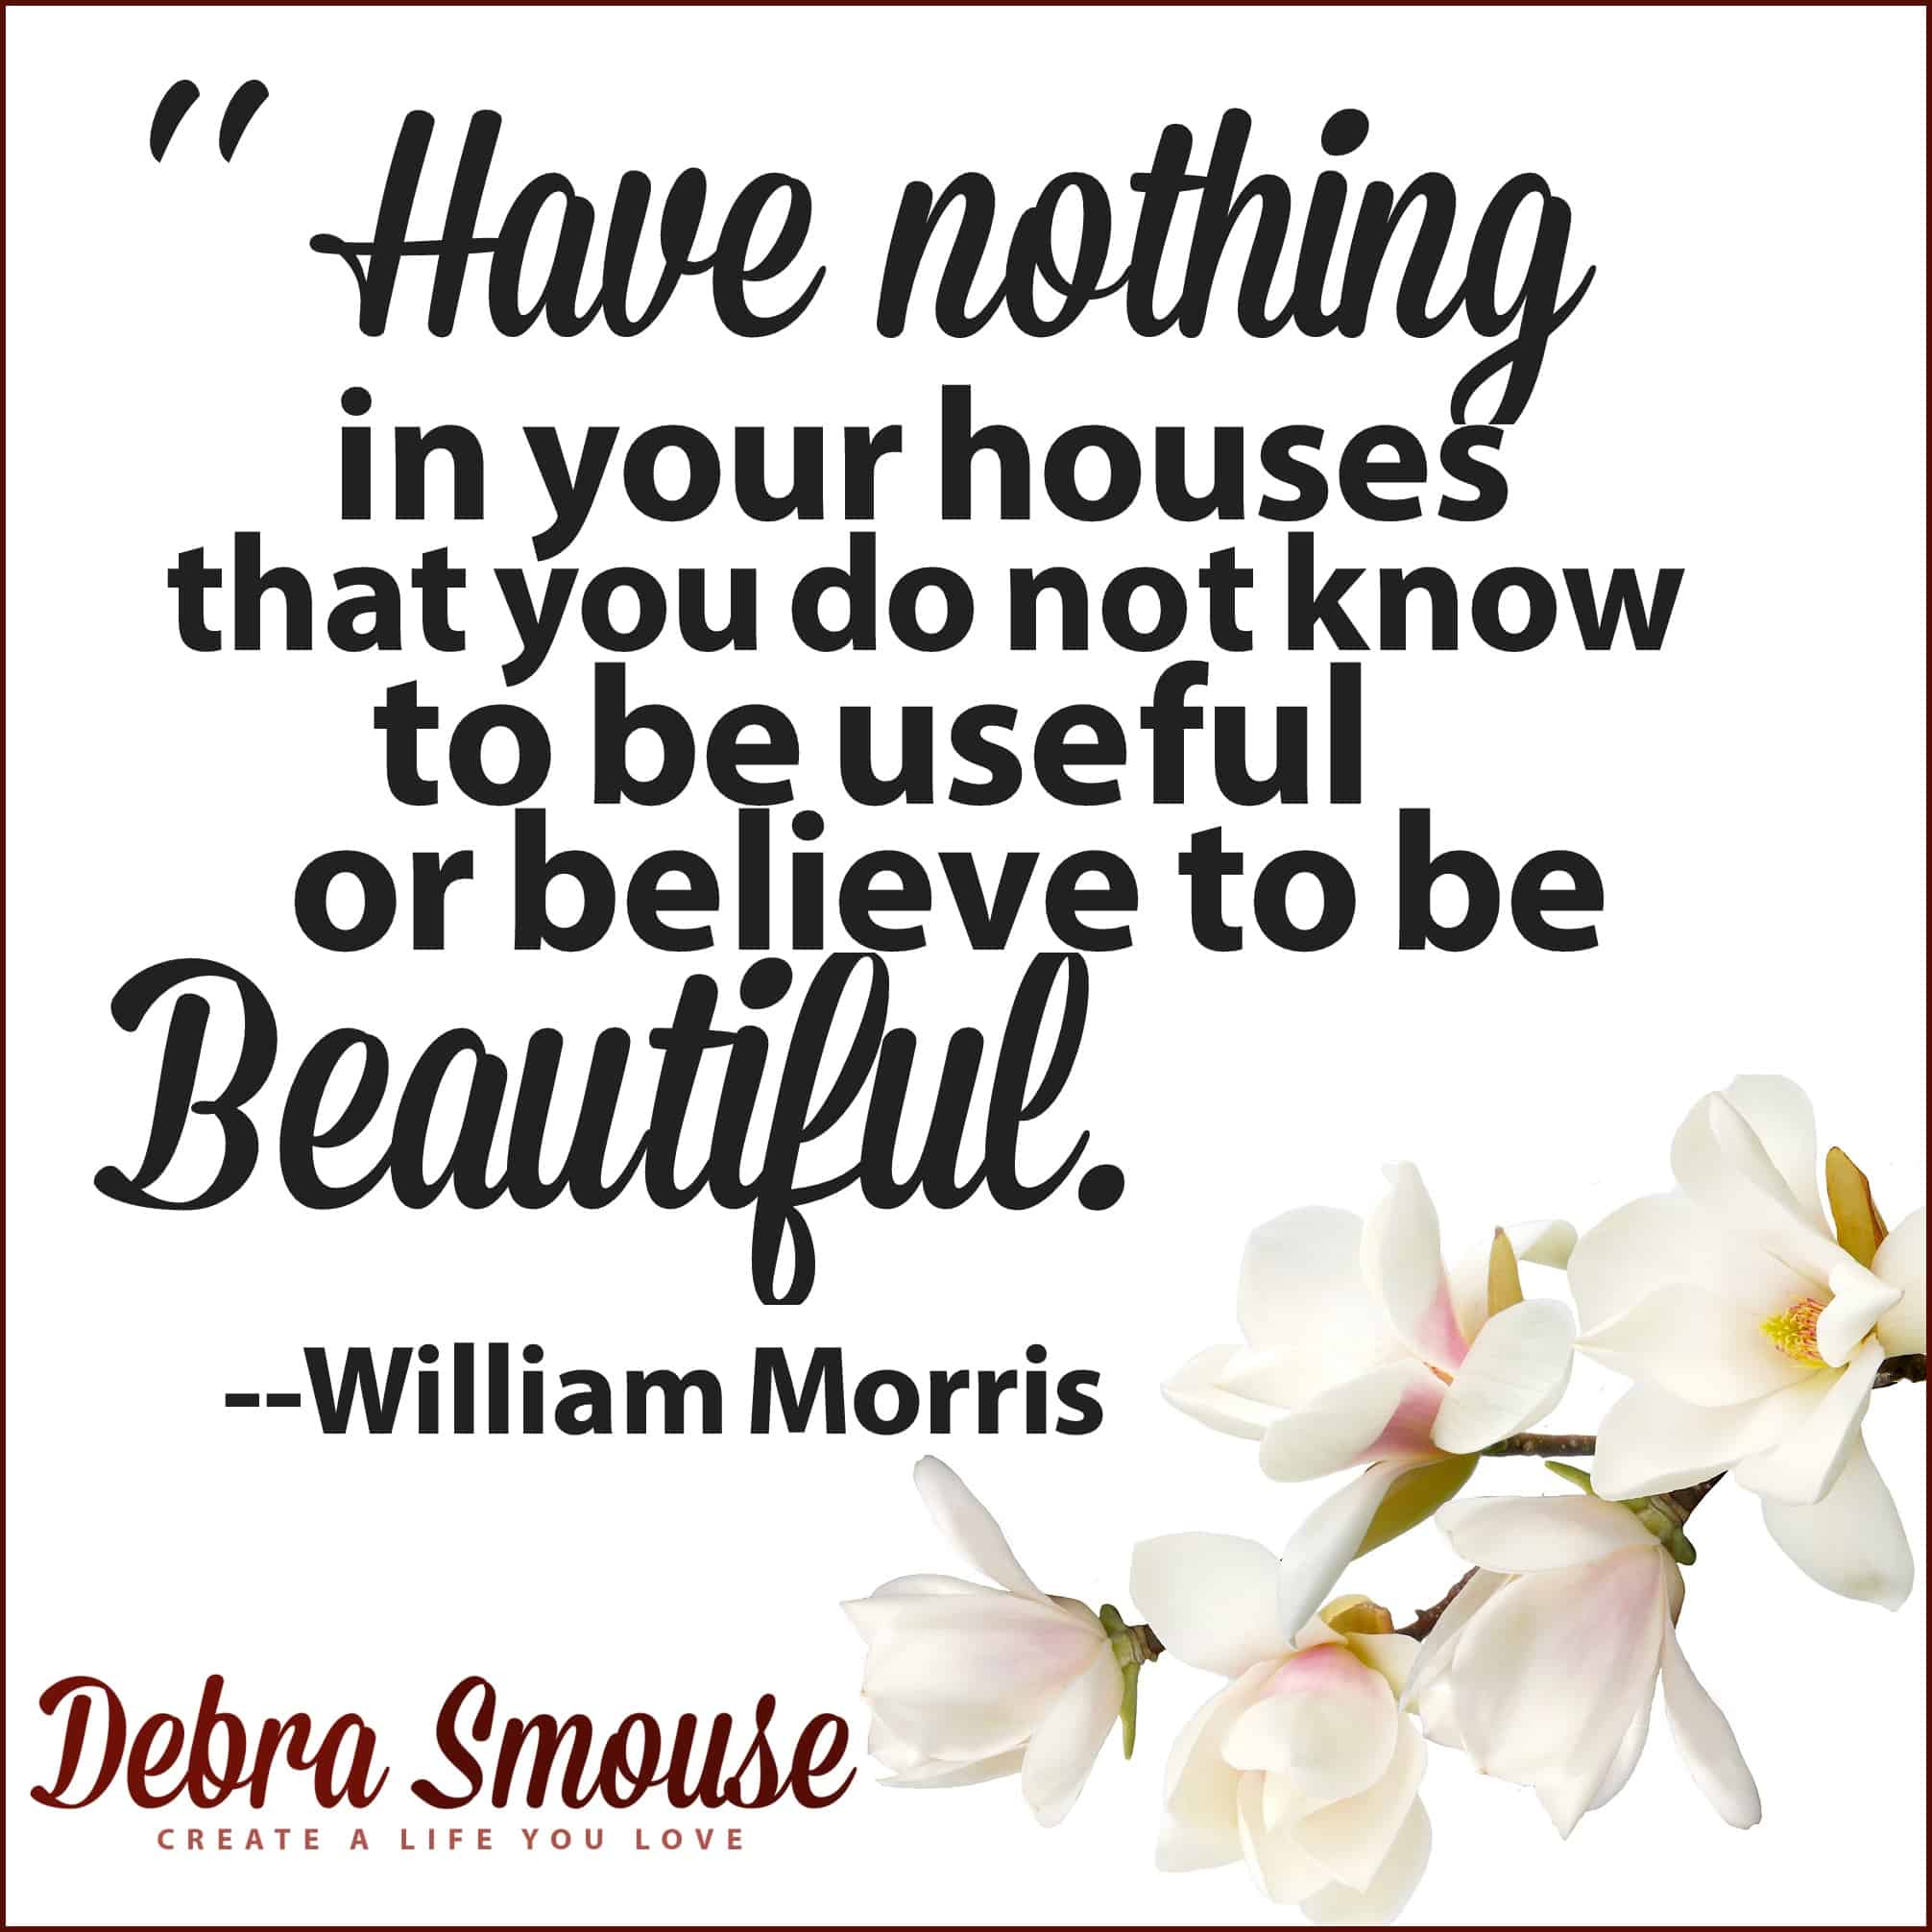 Inspiring Decluttering and Organization Quotes gathered by Debra Smouse